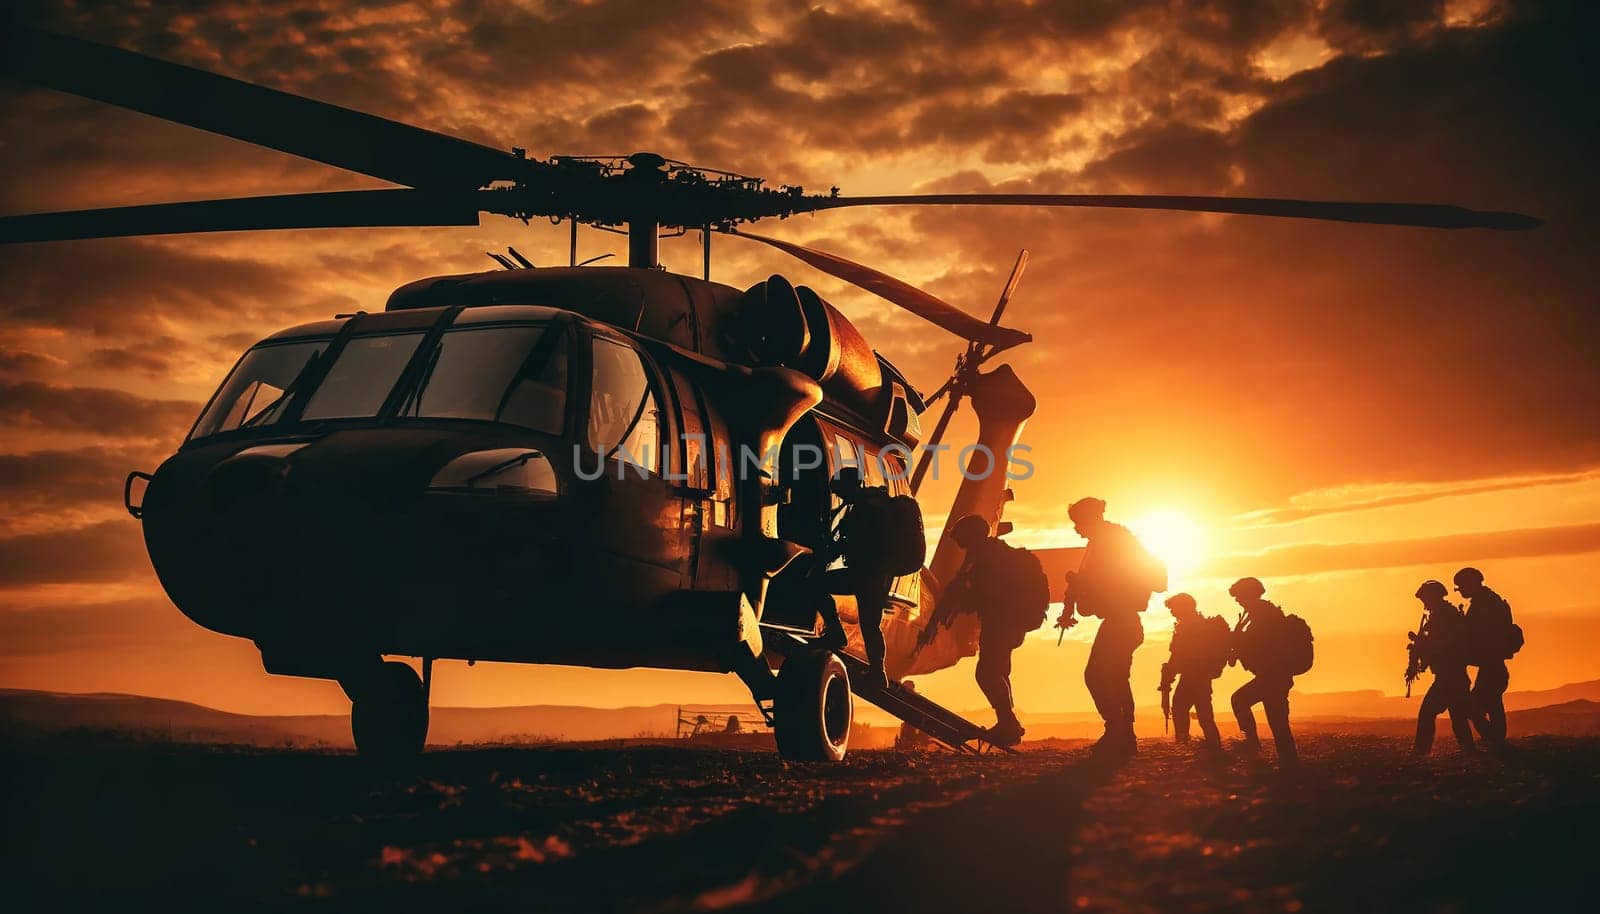 soldiers with machine guns board a helicopter at sunset by Annado